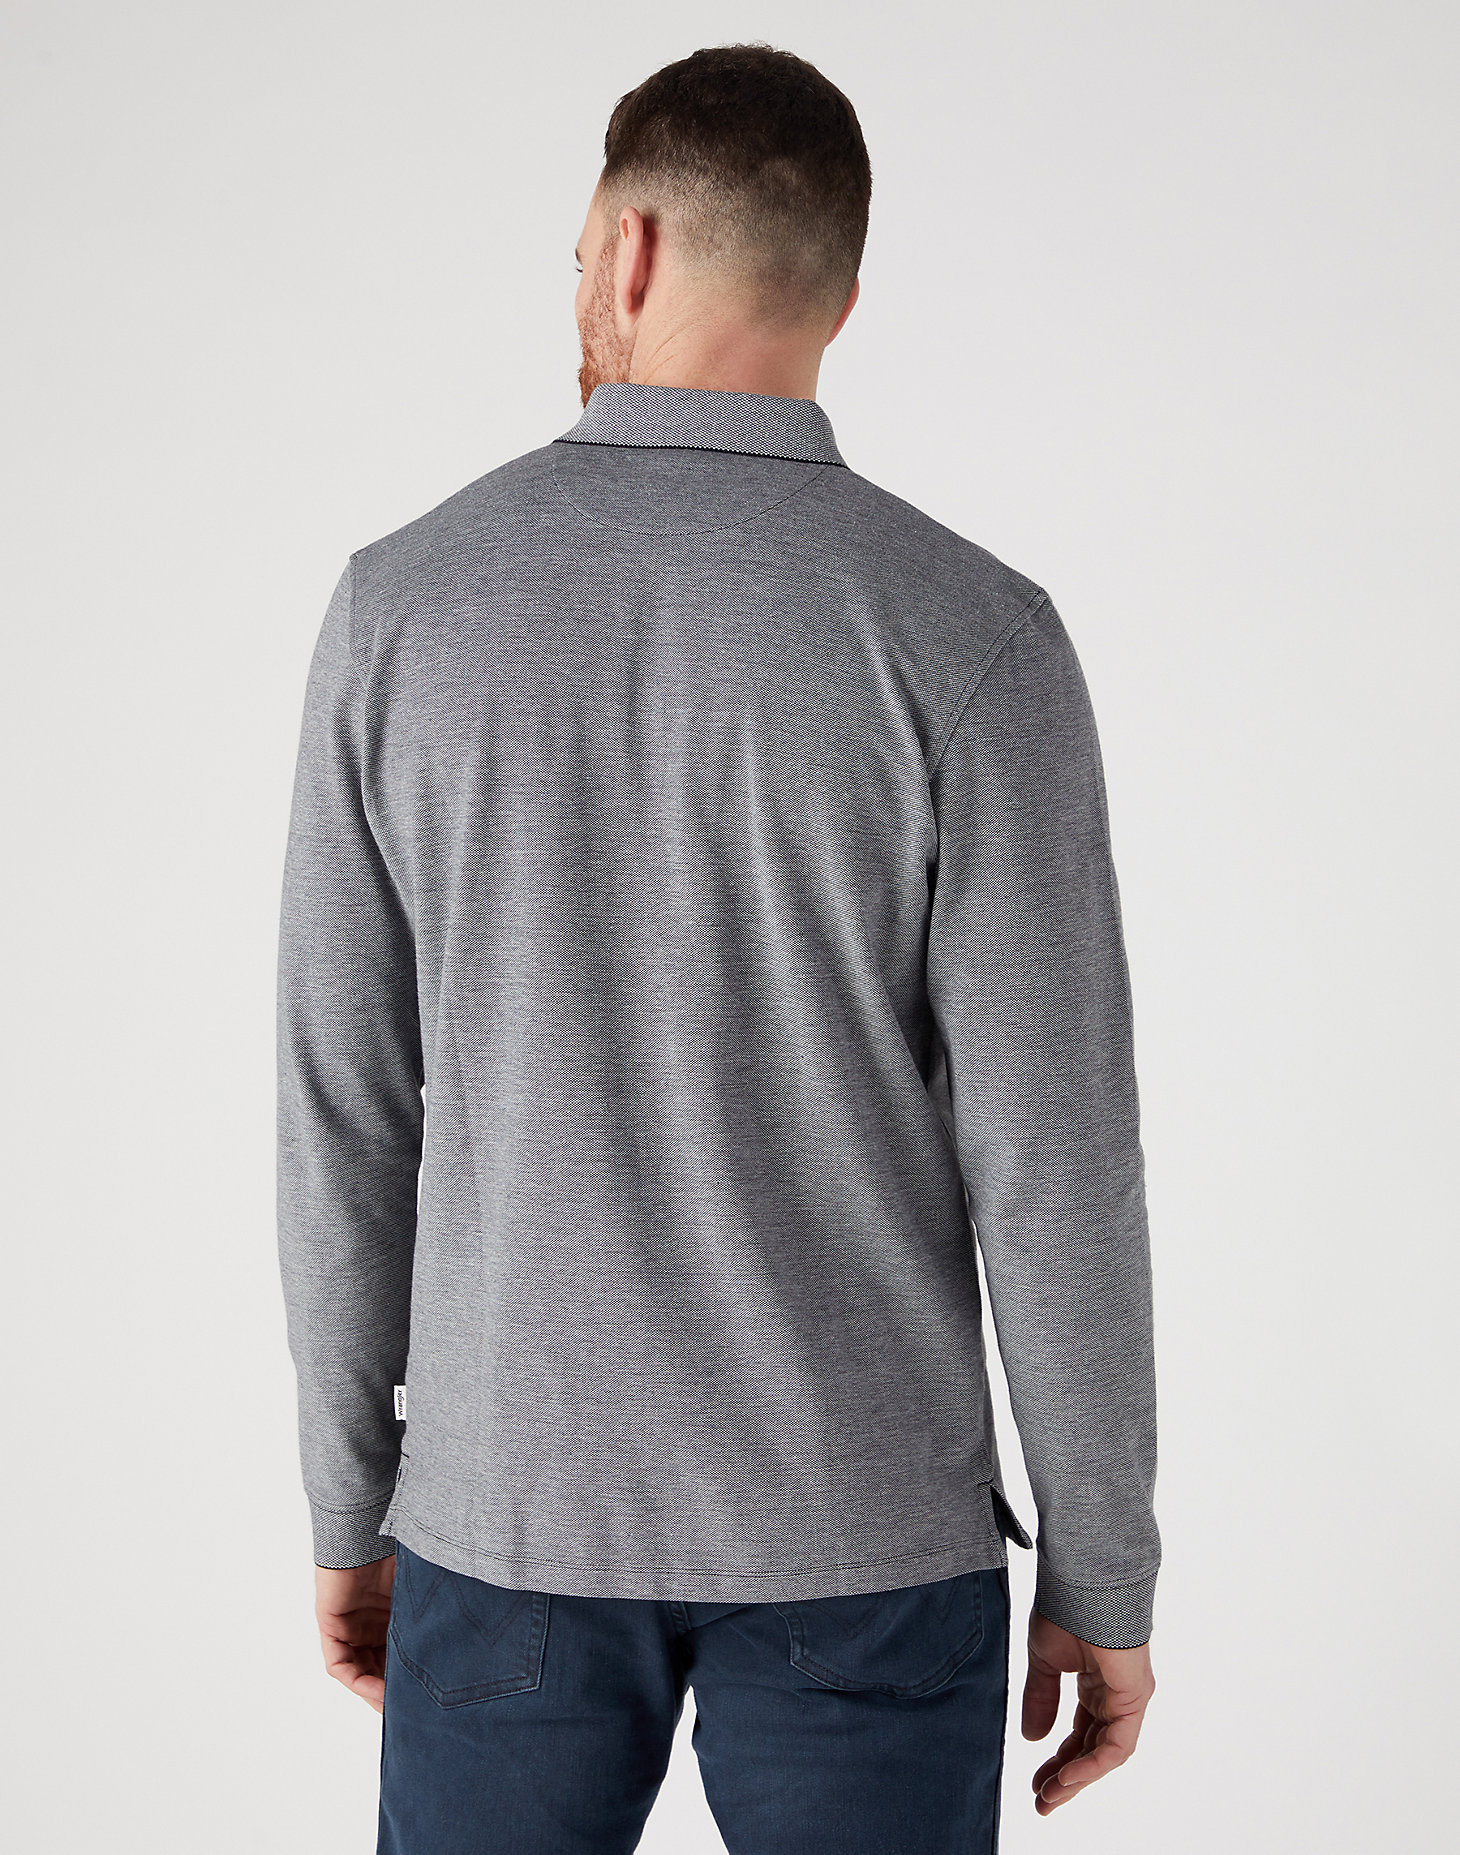 Long Sleeve Refined Polo in Black alternative view 2